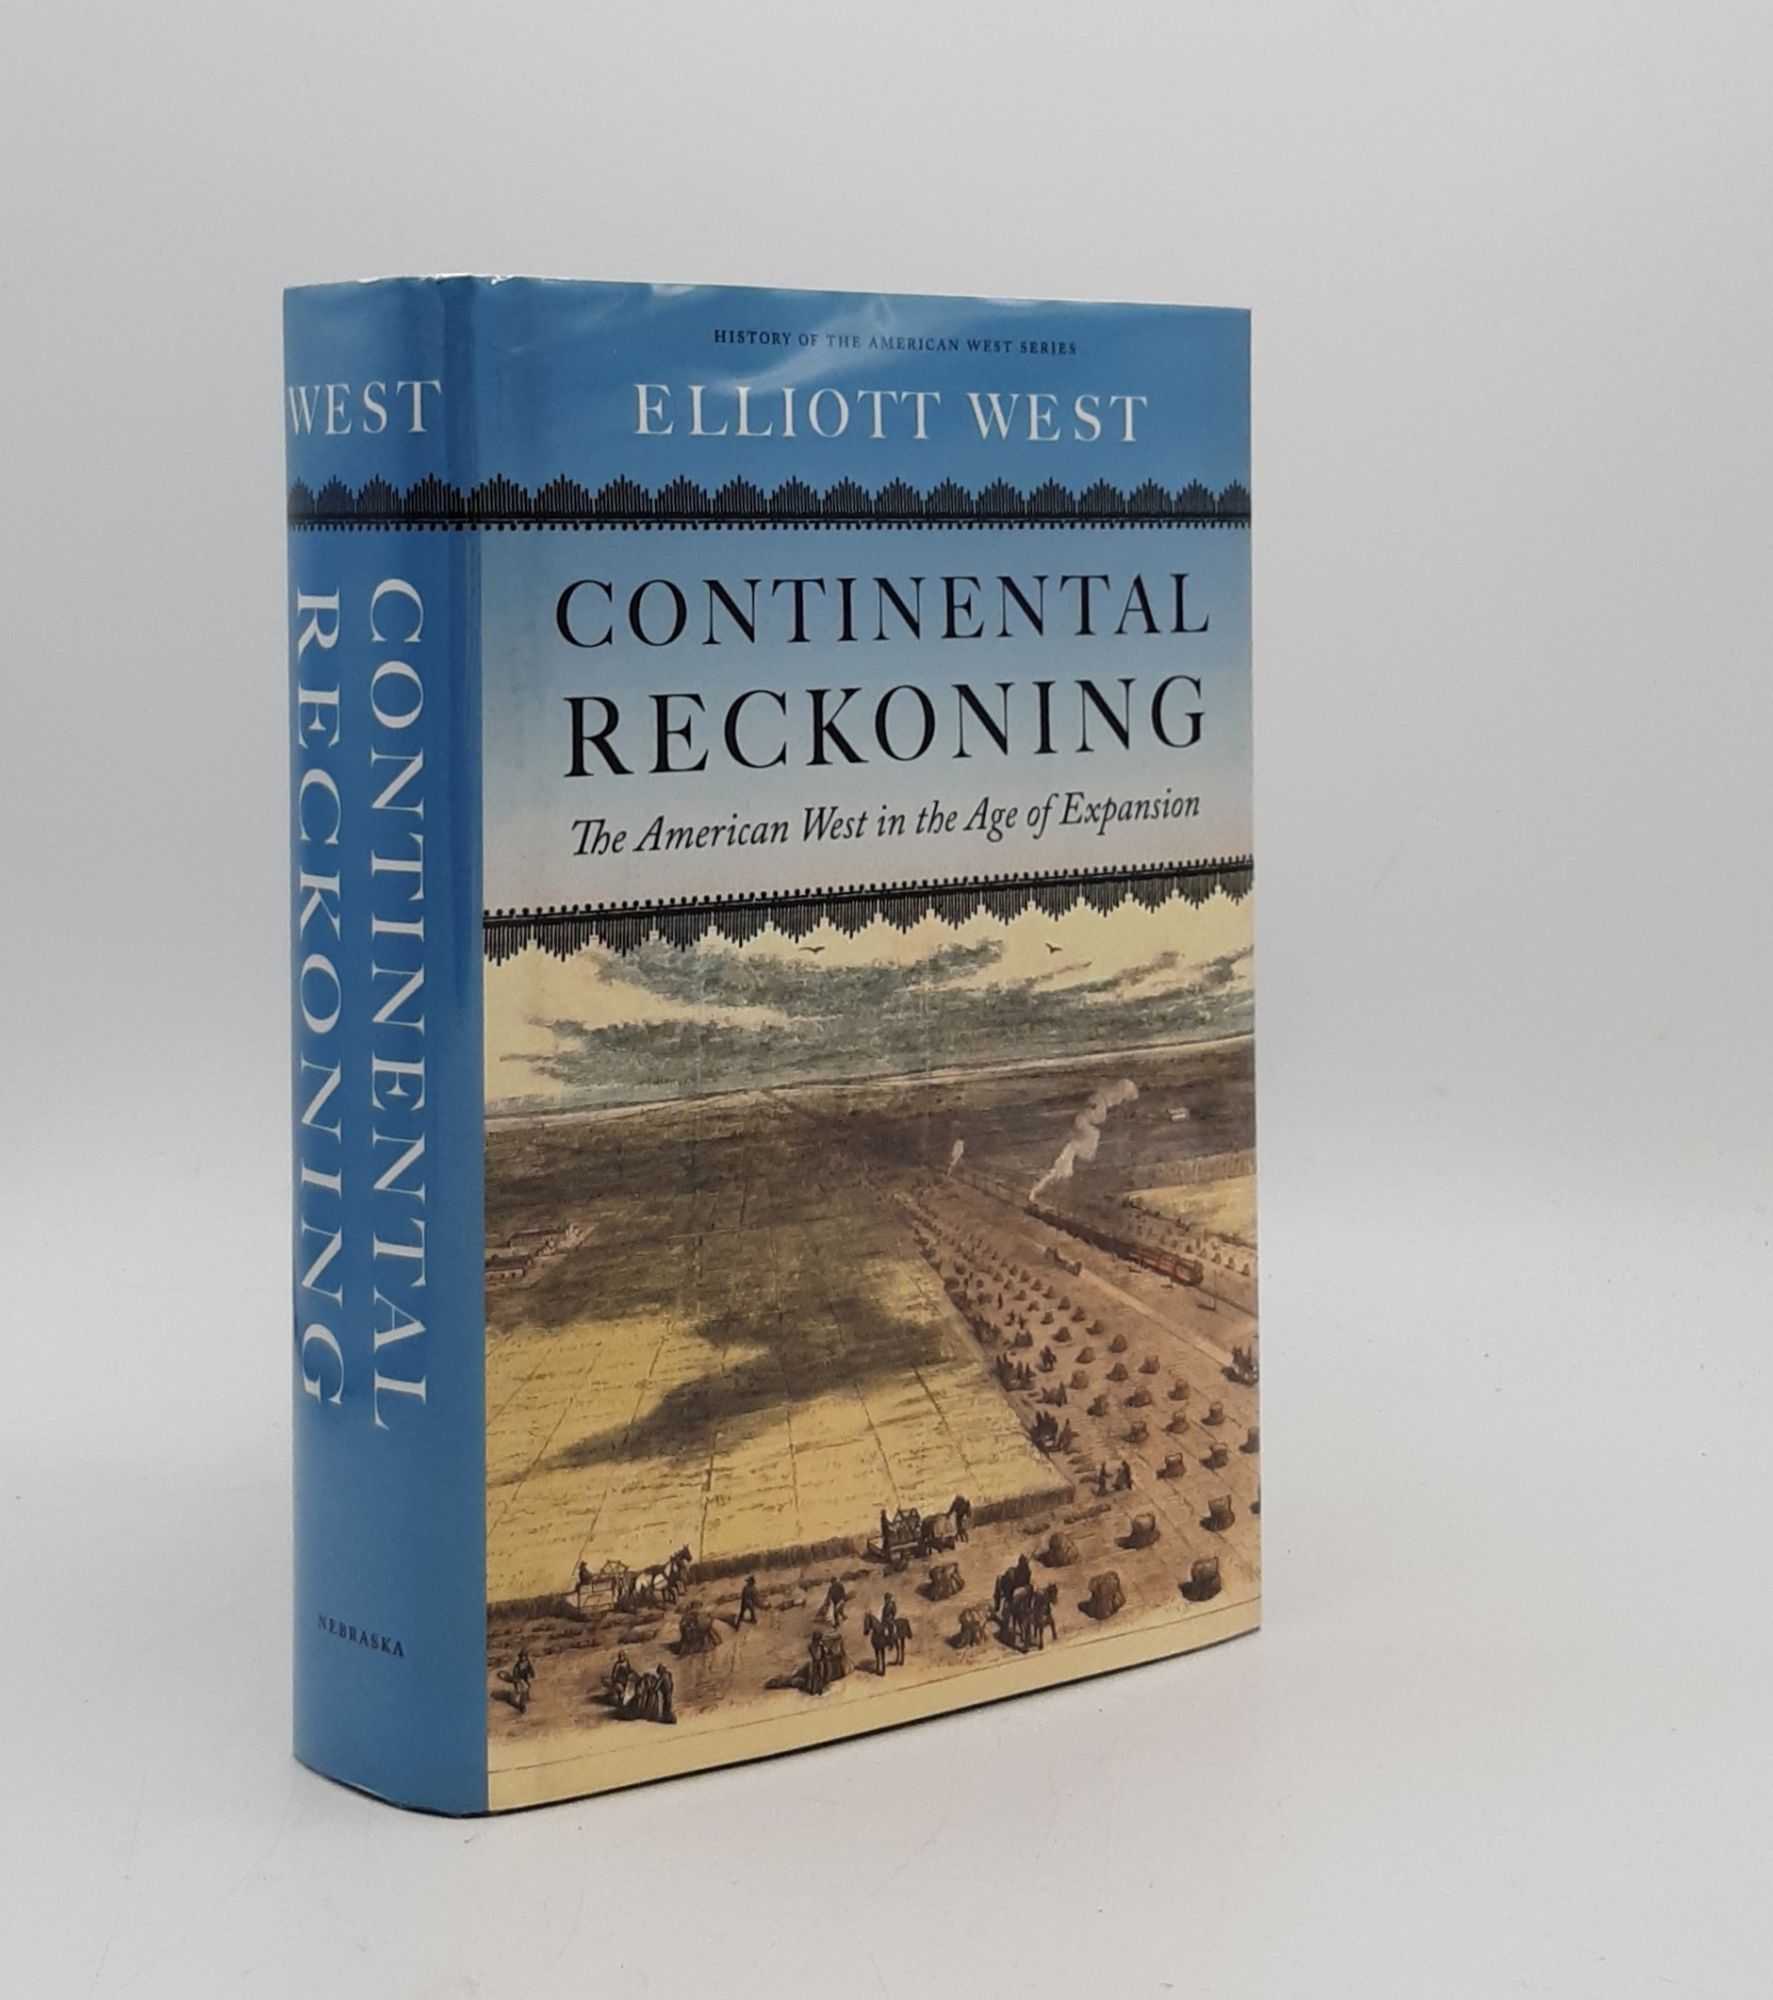 CONTINENTAL RECKONING The American West in the Age of Expansion by WEST  Elliott